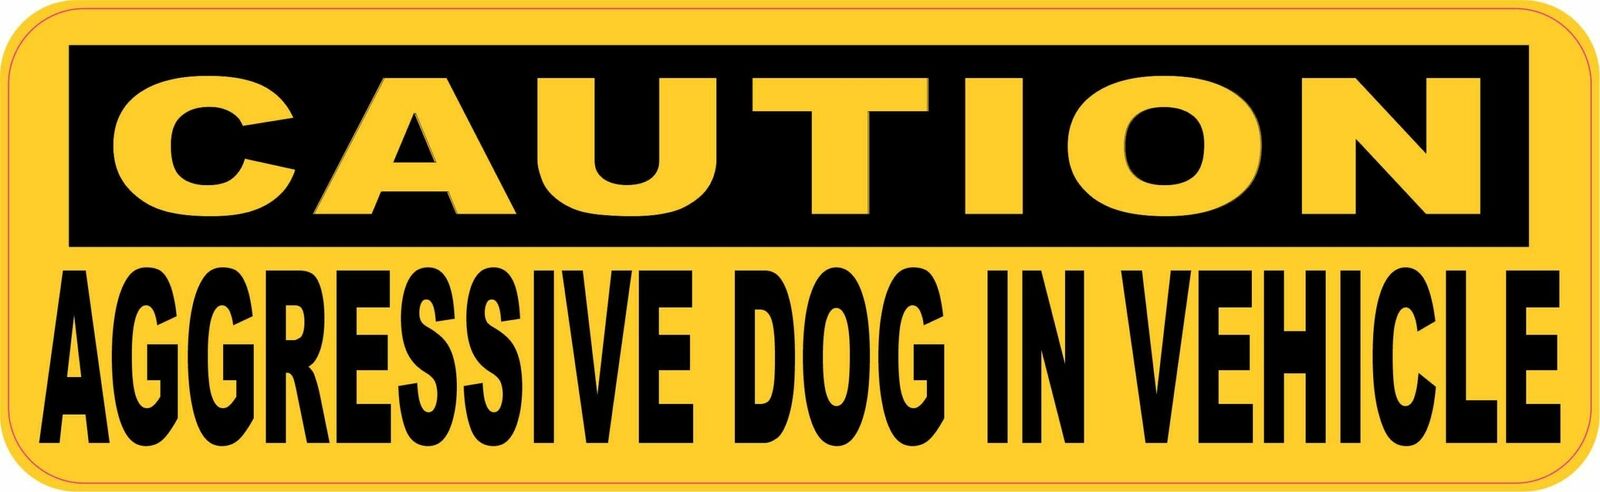 10in x 3in Aggressive Dog in Vehicle Magnet Car Truck Vehicle Magnetic Sign